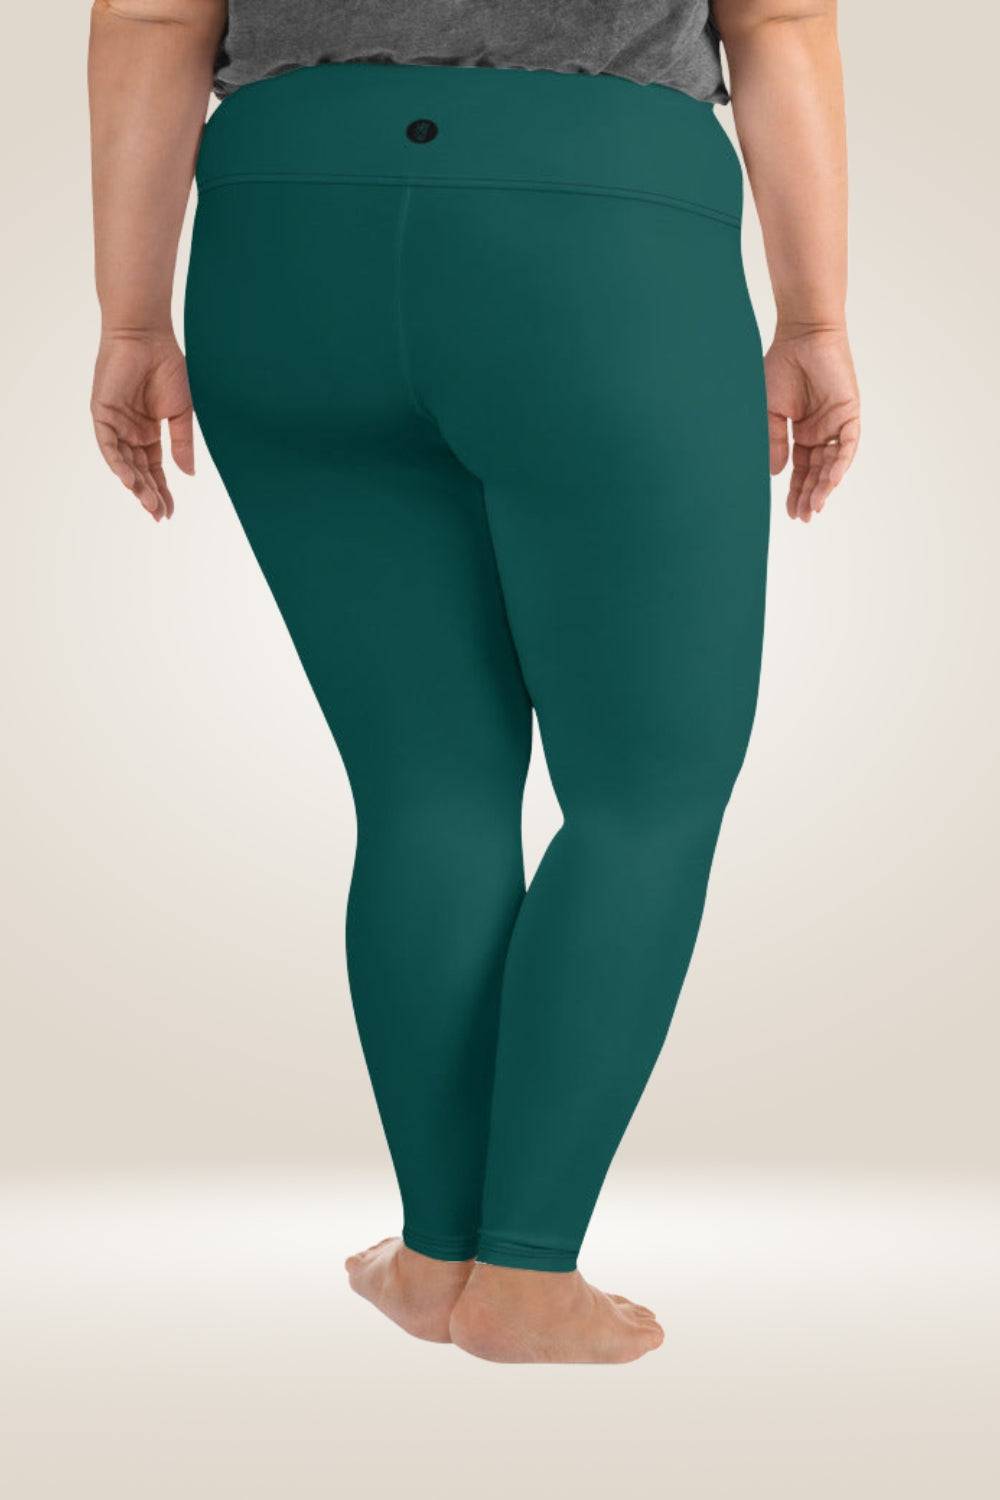 Forest Green High Waisted Plus Size Leggings - TGC Boutique -